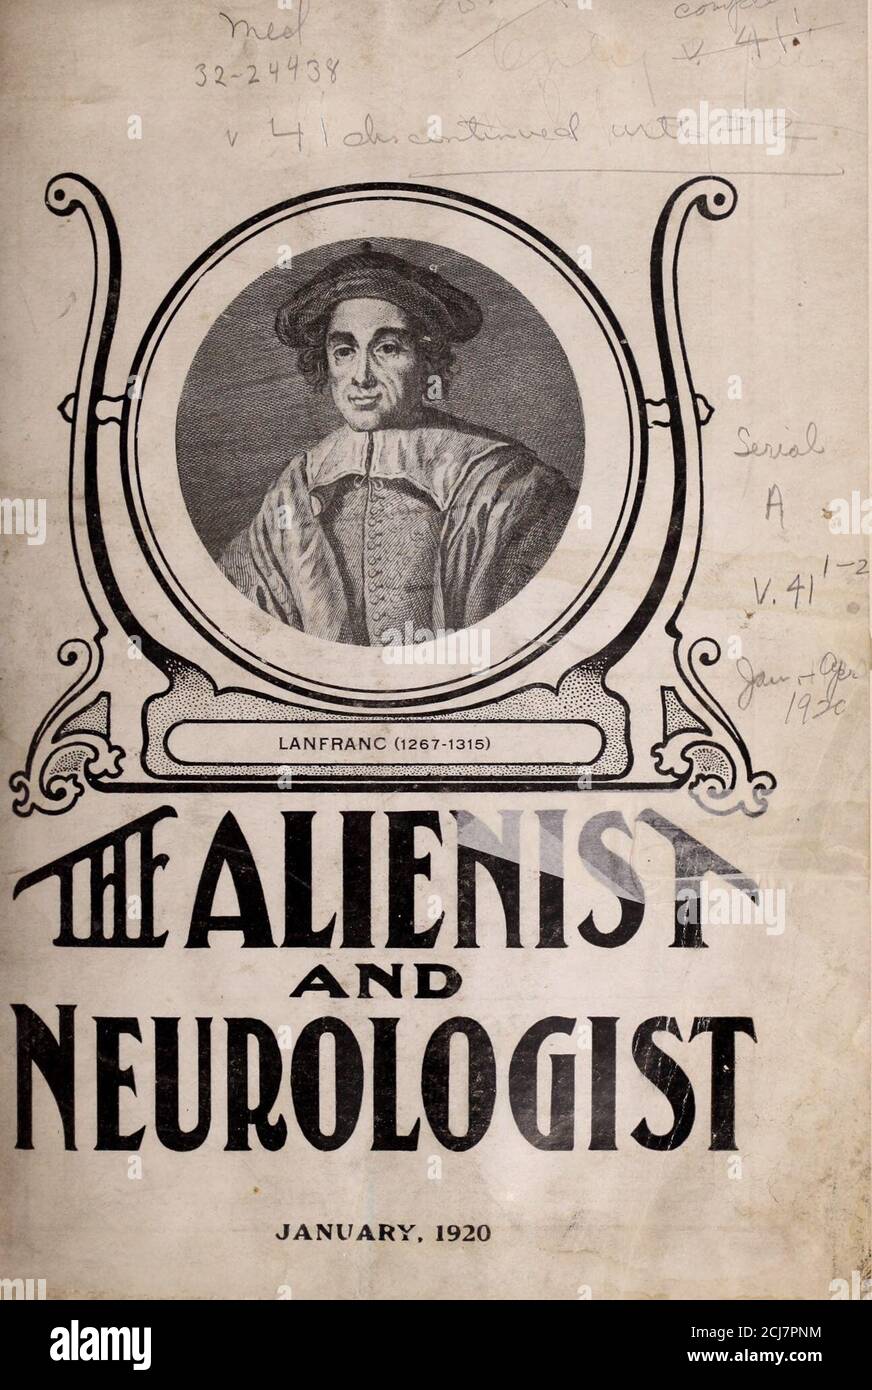 . Alienist and neurologist. . is often due to a deficientsupply of specific chemical elements,such as calcium, sodium, potassium, manganese, phos-phorus, and iron—the so-called chemical foods. Quinine and strychnine in small but continued doses exert adynamic or activating influence upon all metabolism. Syr. Hypophosphites Comp. Fellows has clinically demonstrated its value in conditions of malnutri-tion for over fifty years. Fellows Syrup is uniform, stable,bland, easily-assimilable, efficient in action, and reliable in effect Concerning Carminzym Its Success It is a combination that ought to Stock Photo